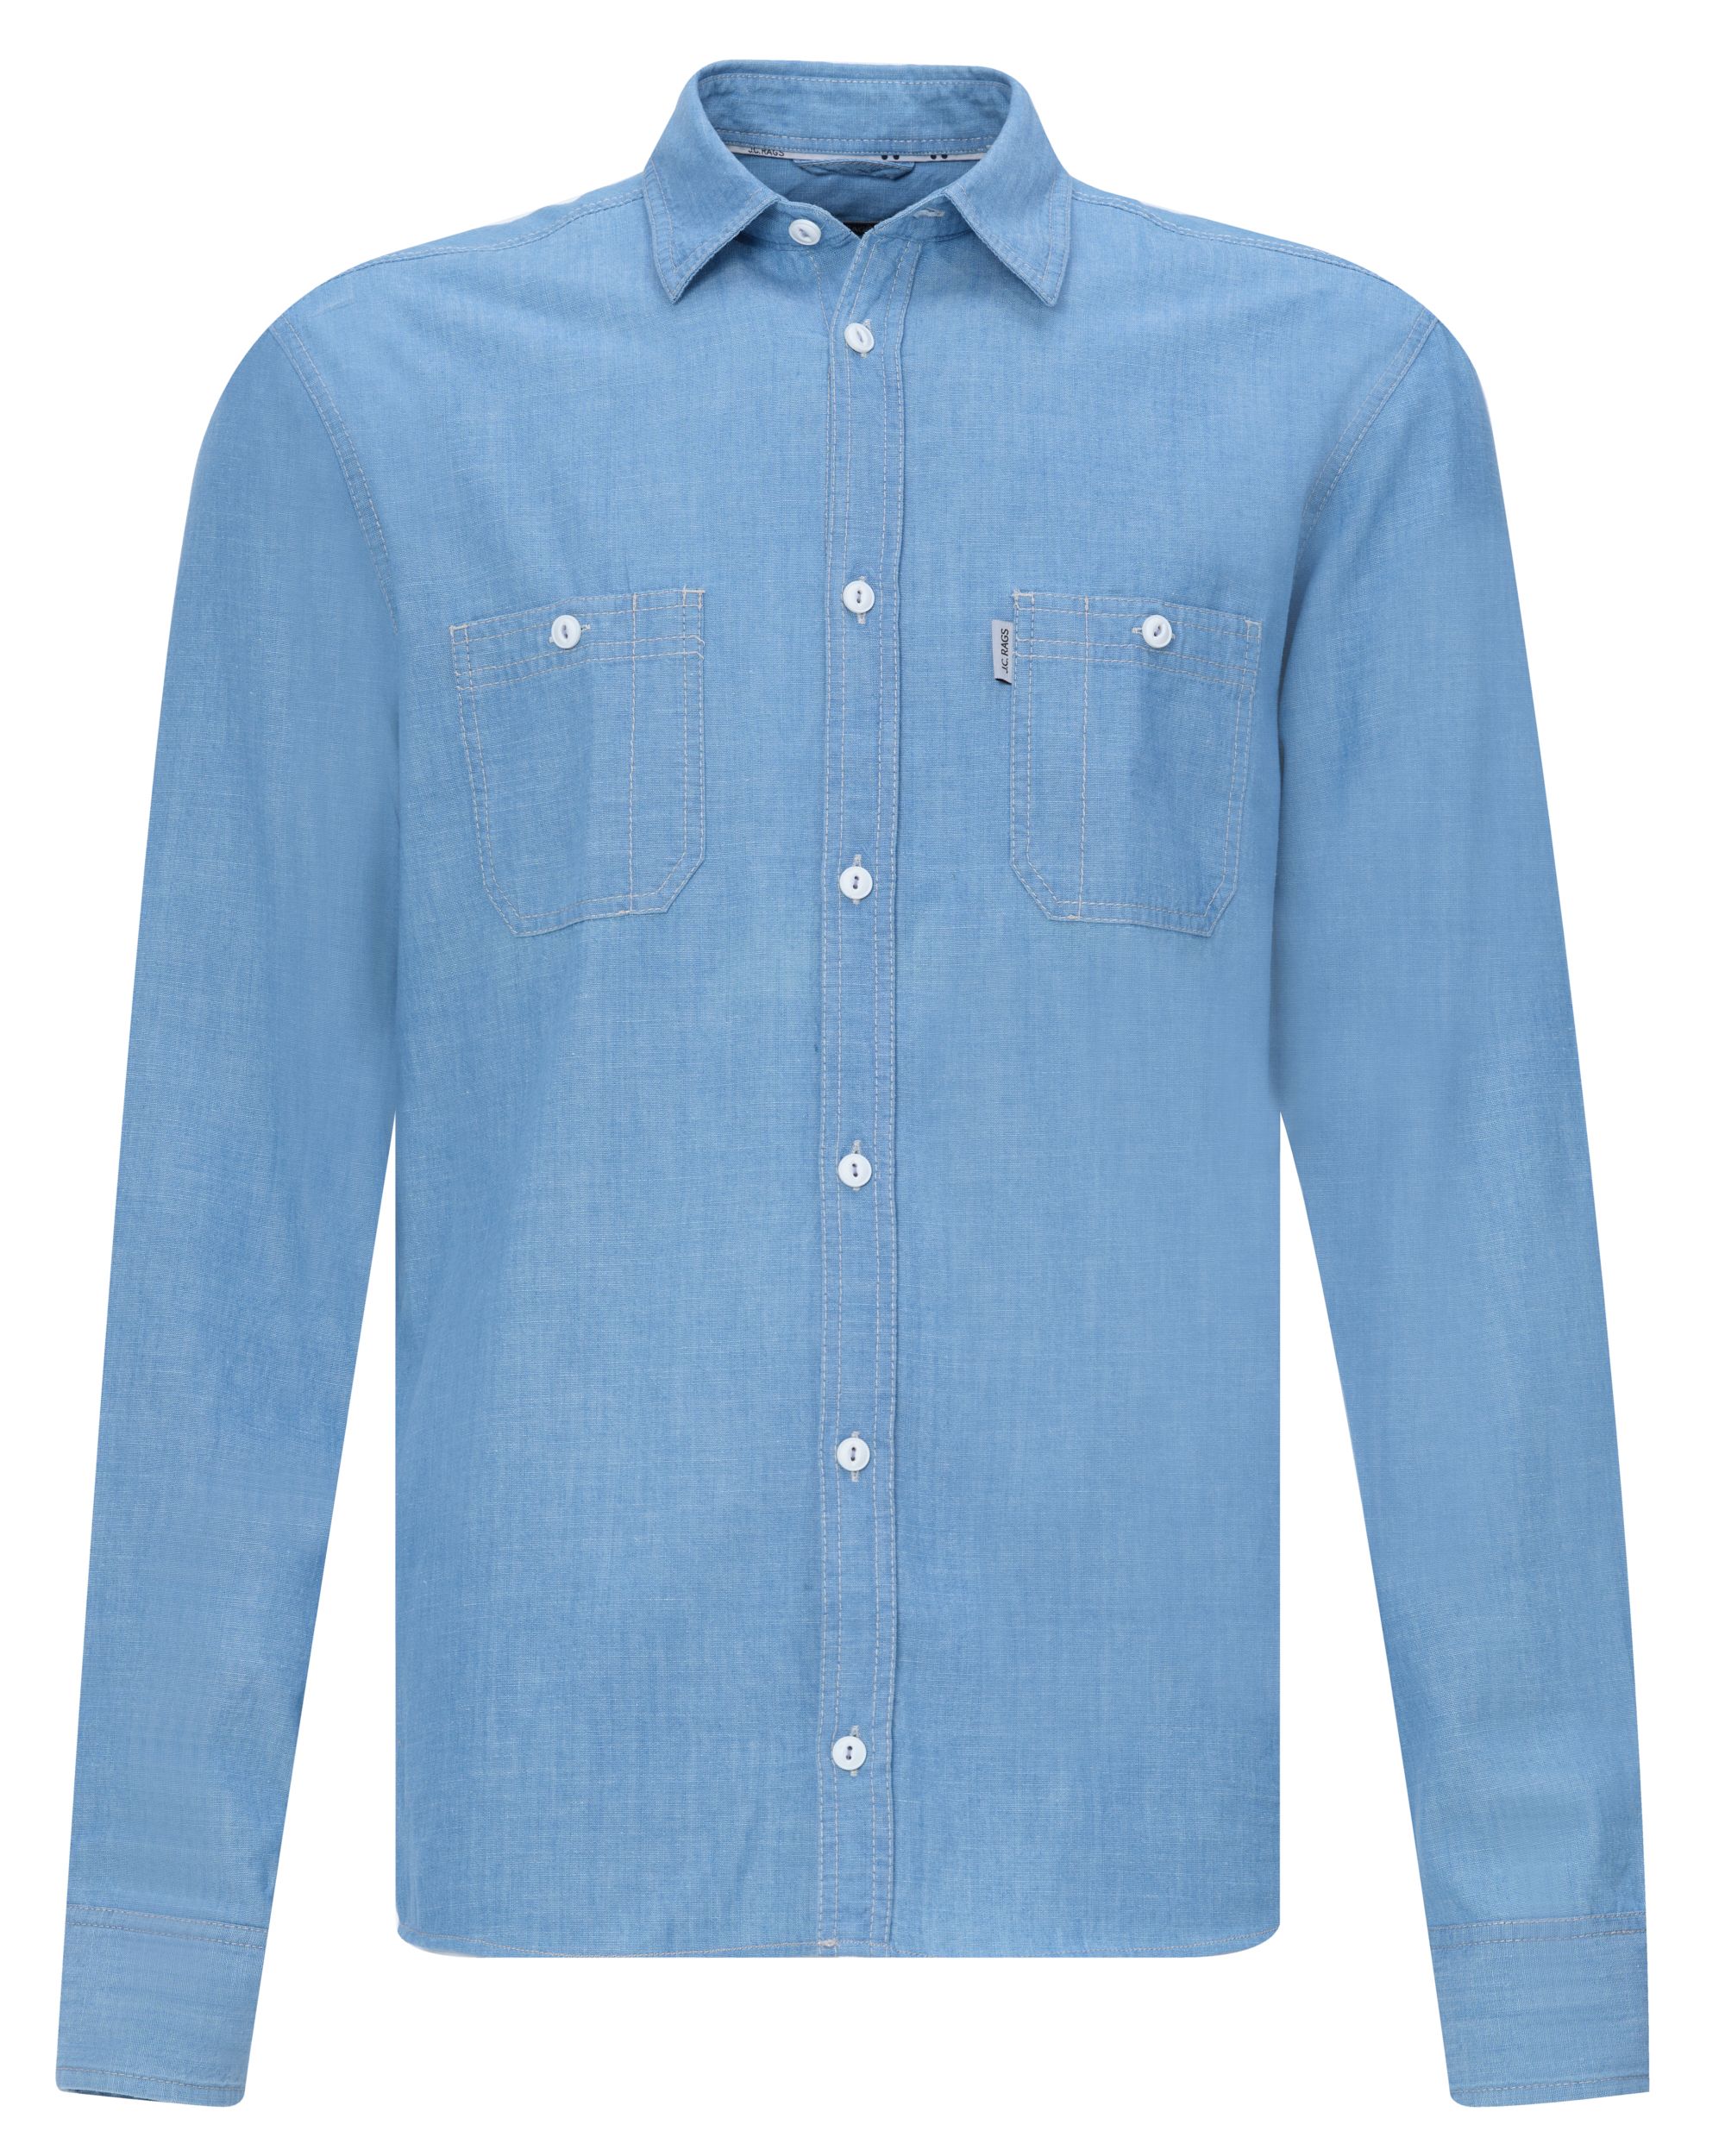 J.C. RAGS Casual Overhemd LM Forget-me-not 081592-001-L